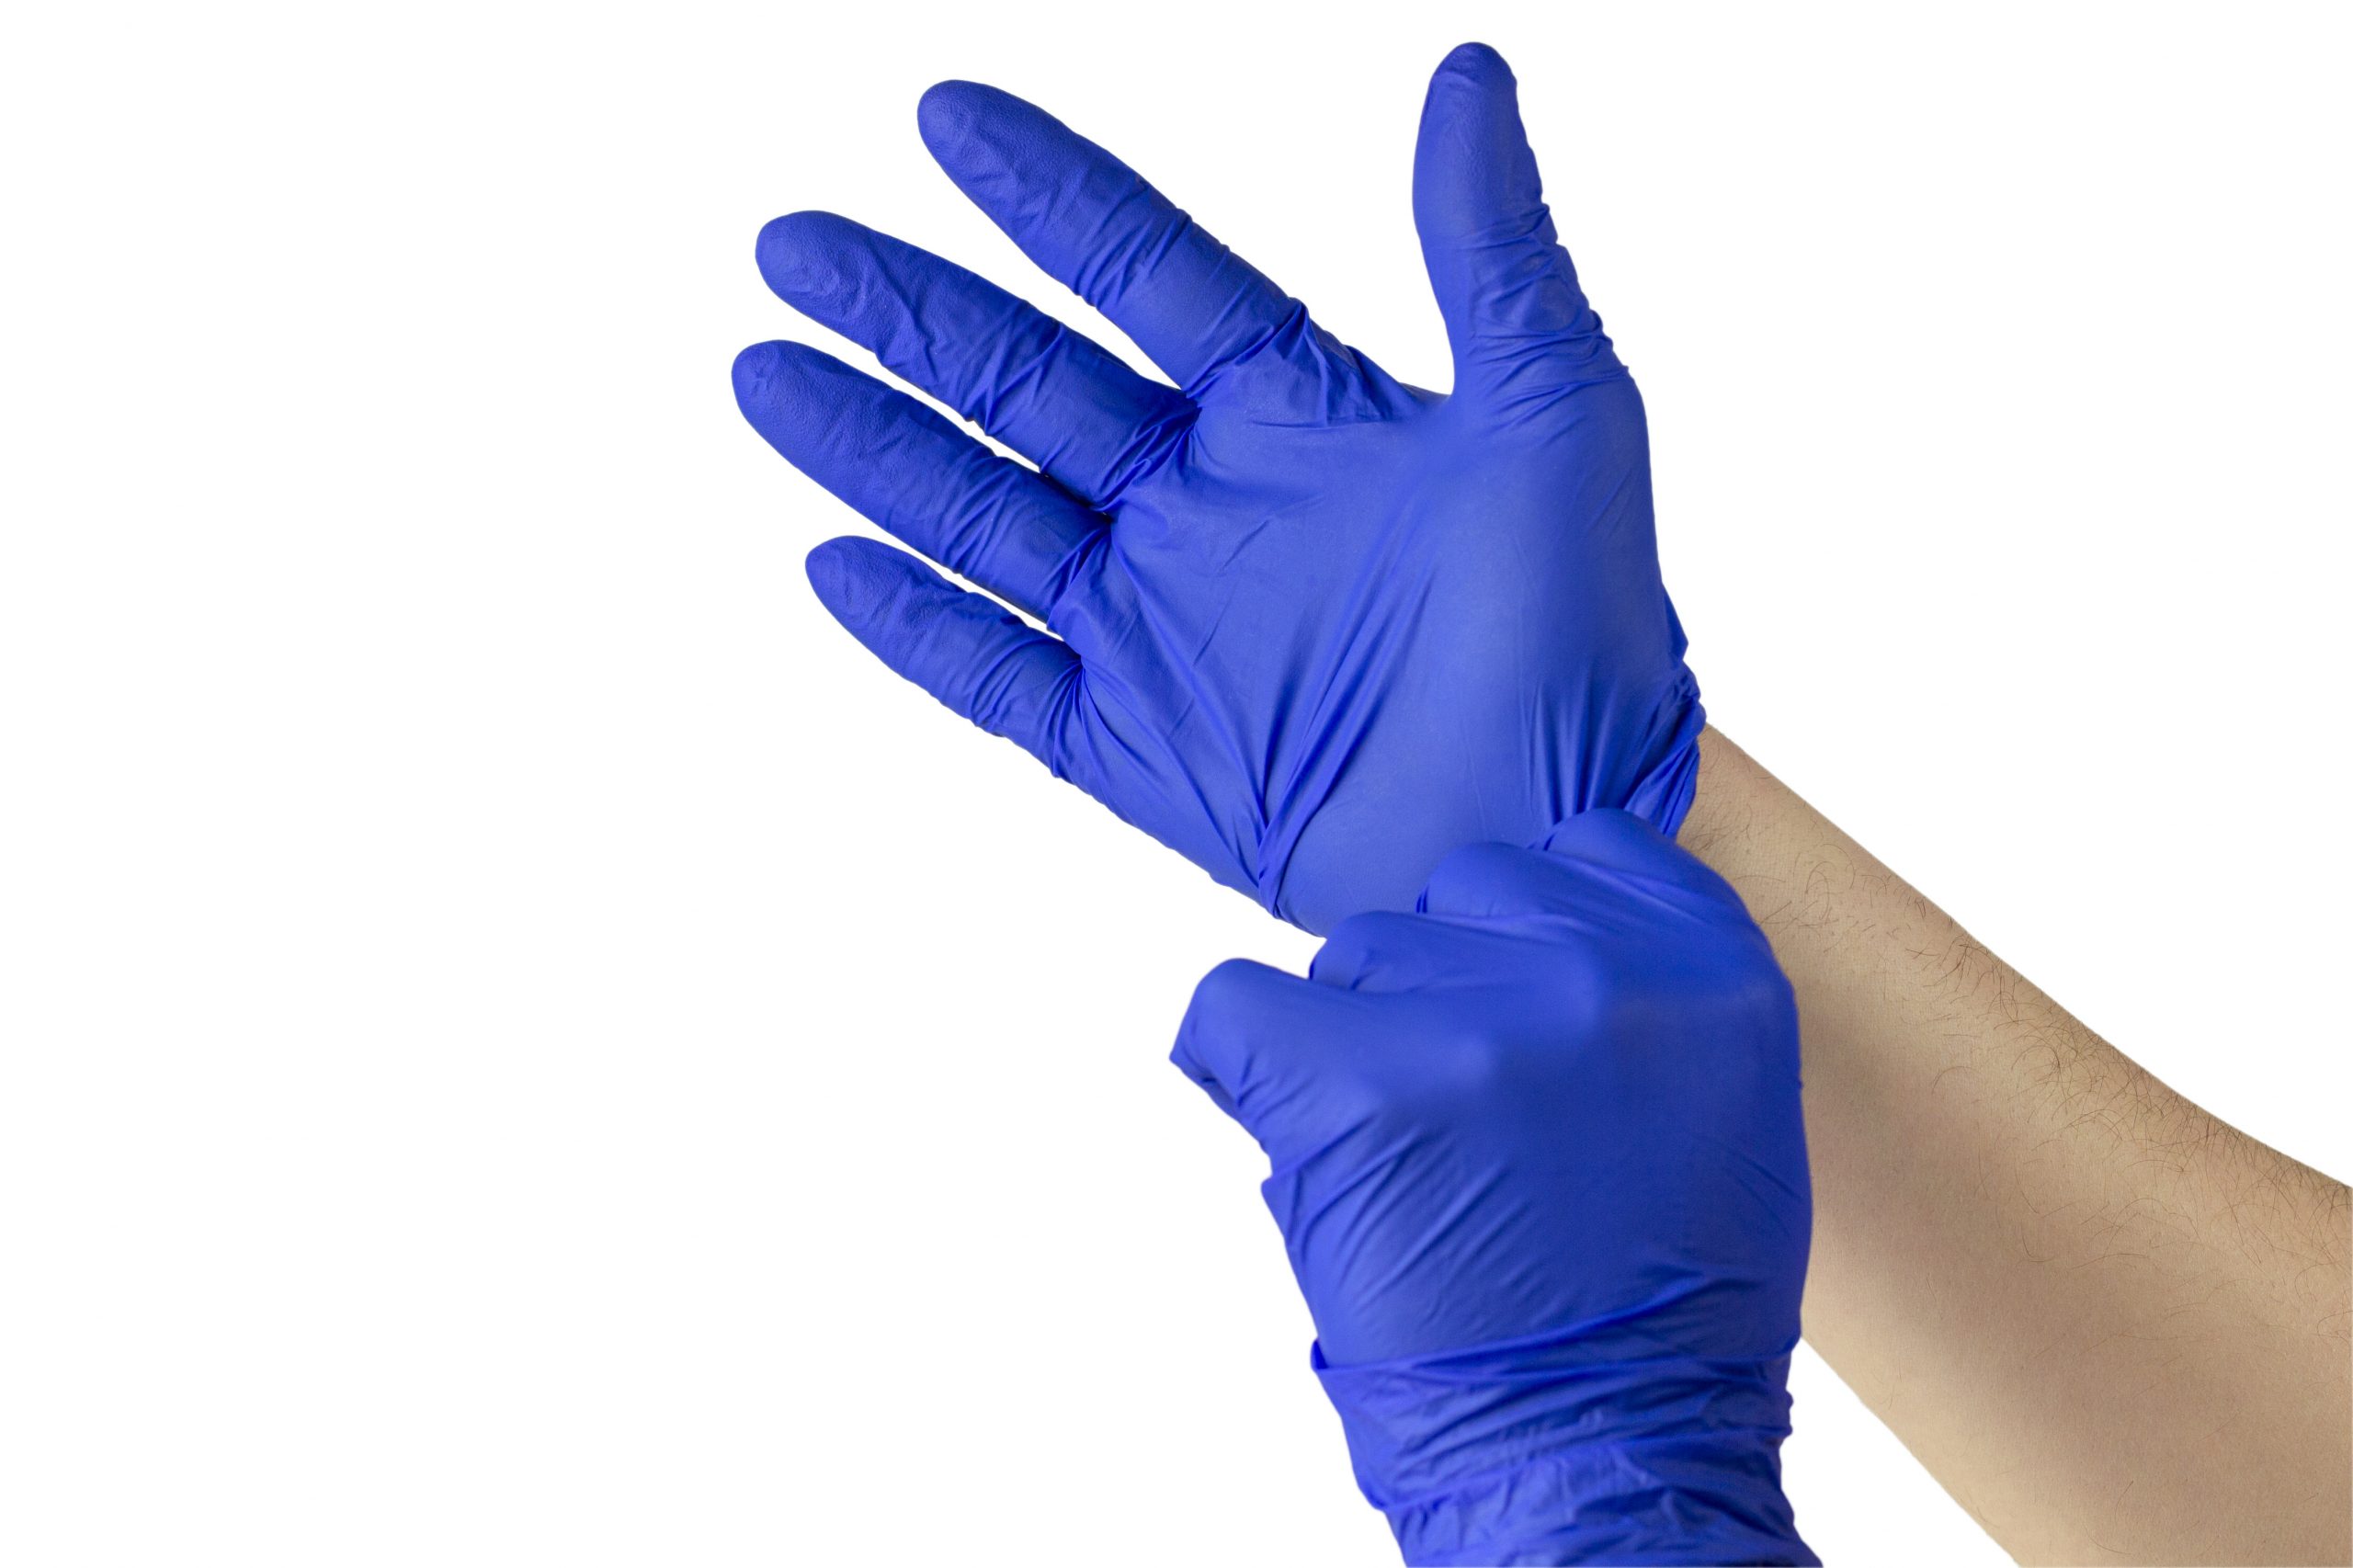 12 Types of Hand Protection Gloves and Their Uses